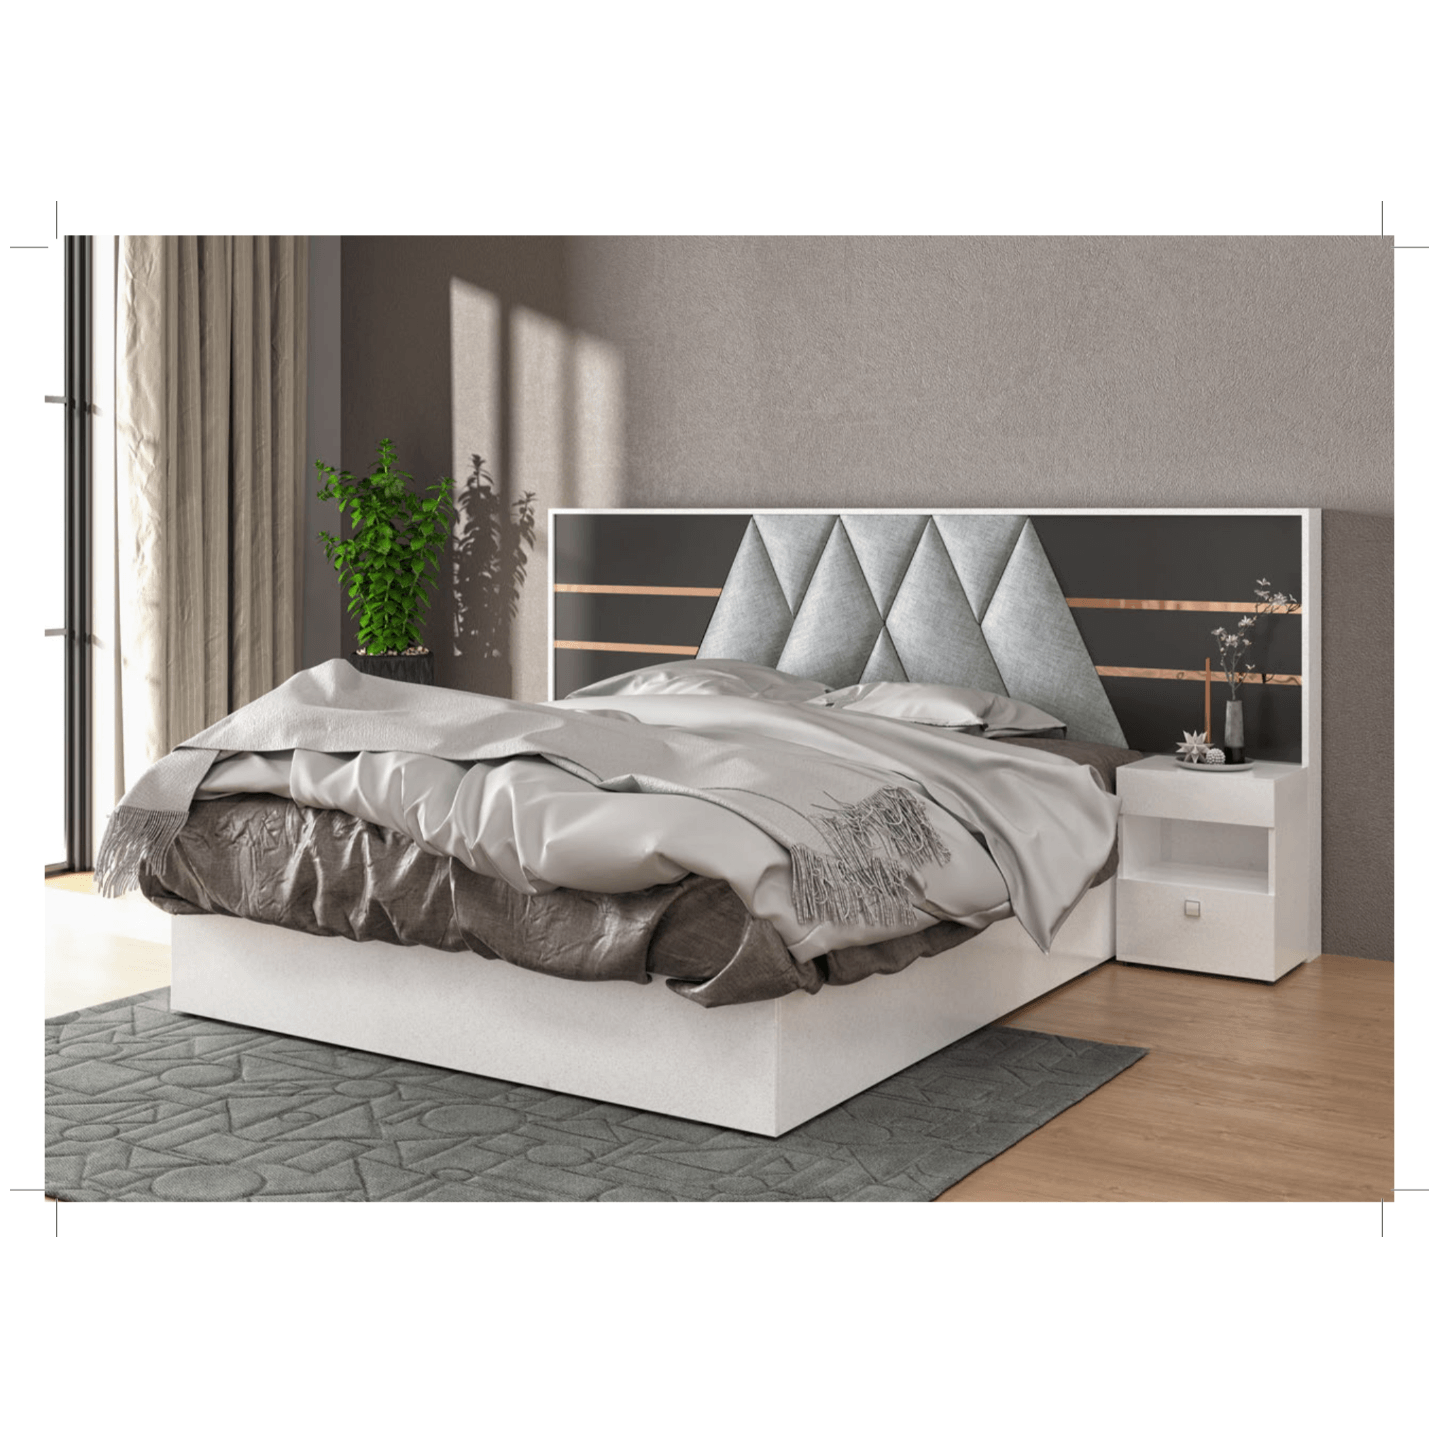 RLF Queen Size Bed 78x60 Hais Bed With Side Box In Grey Colour